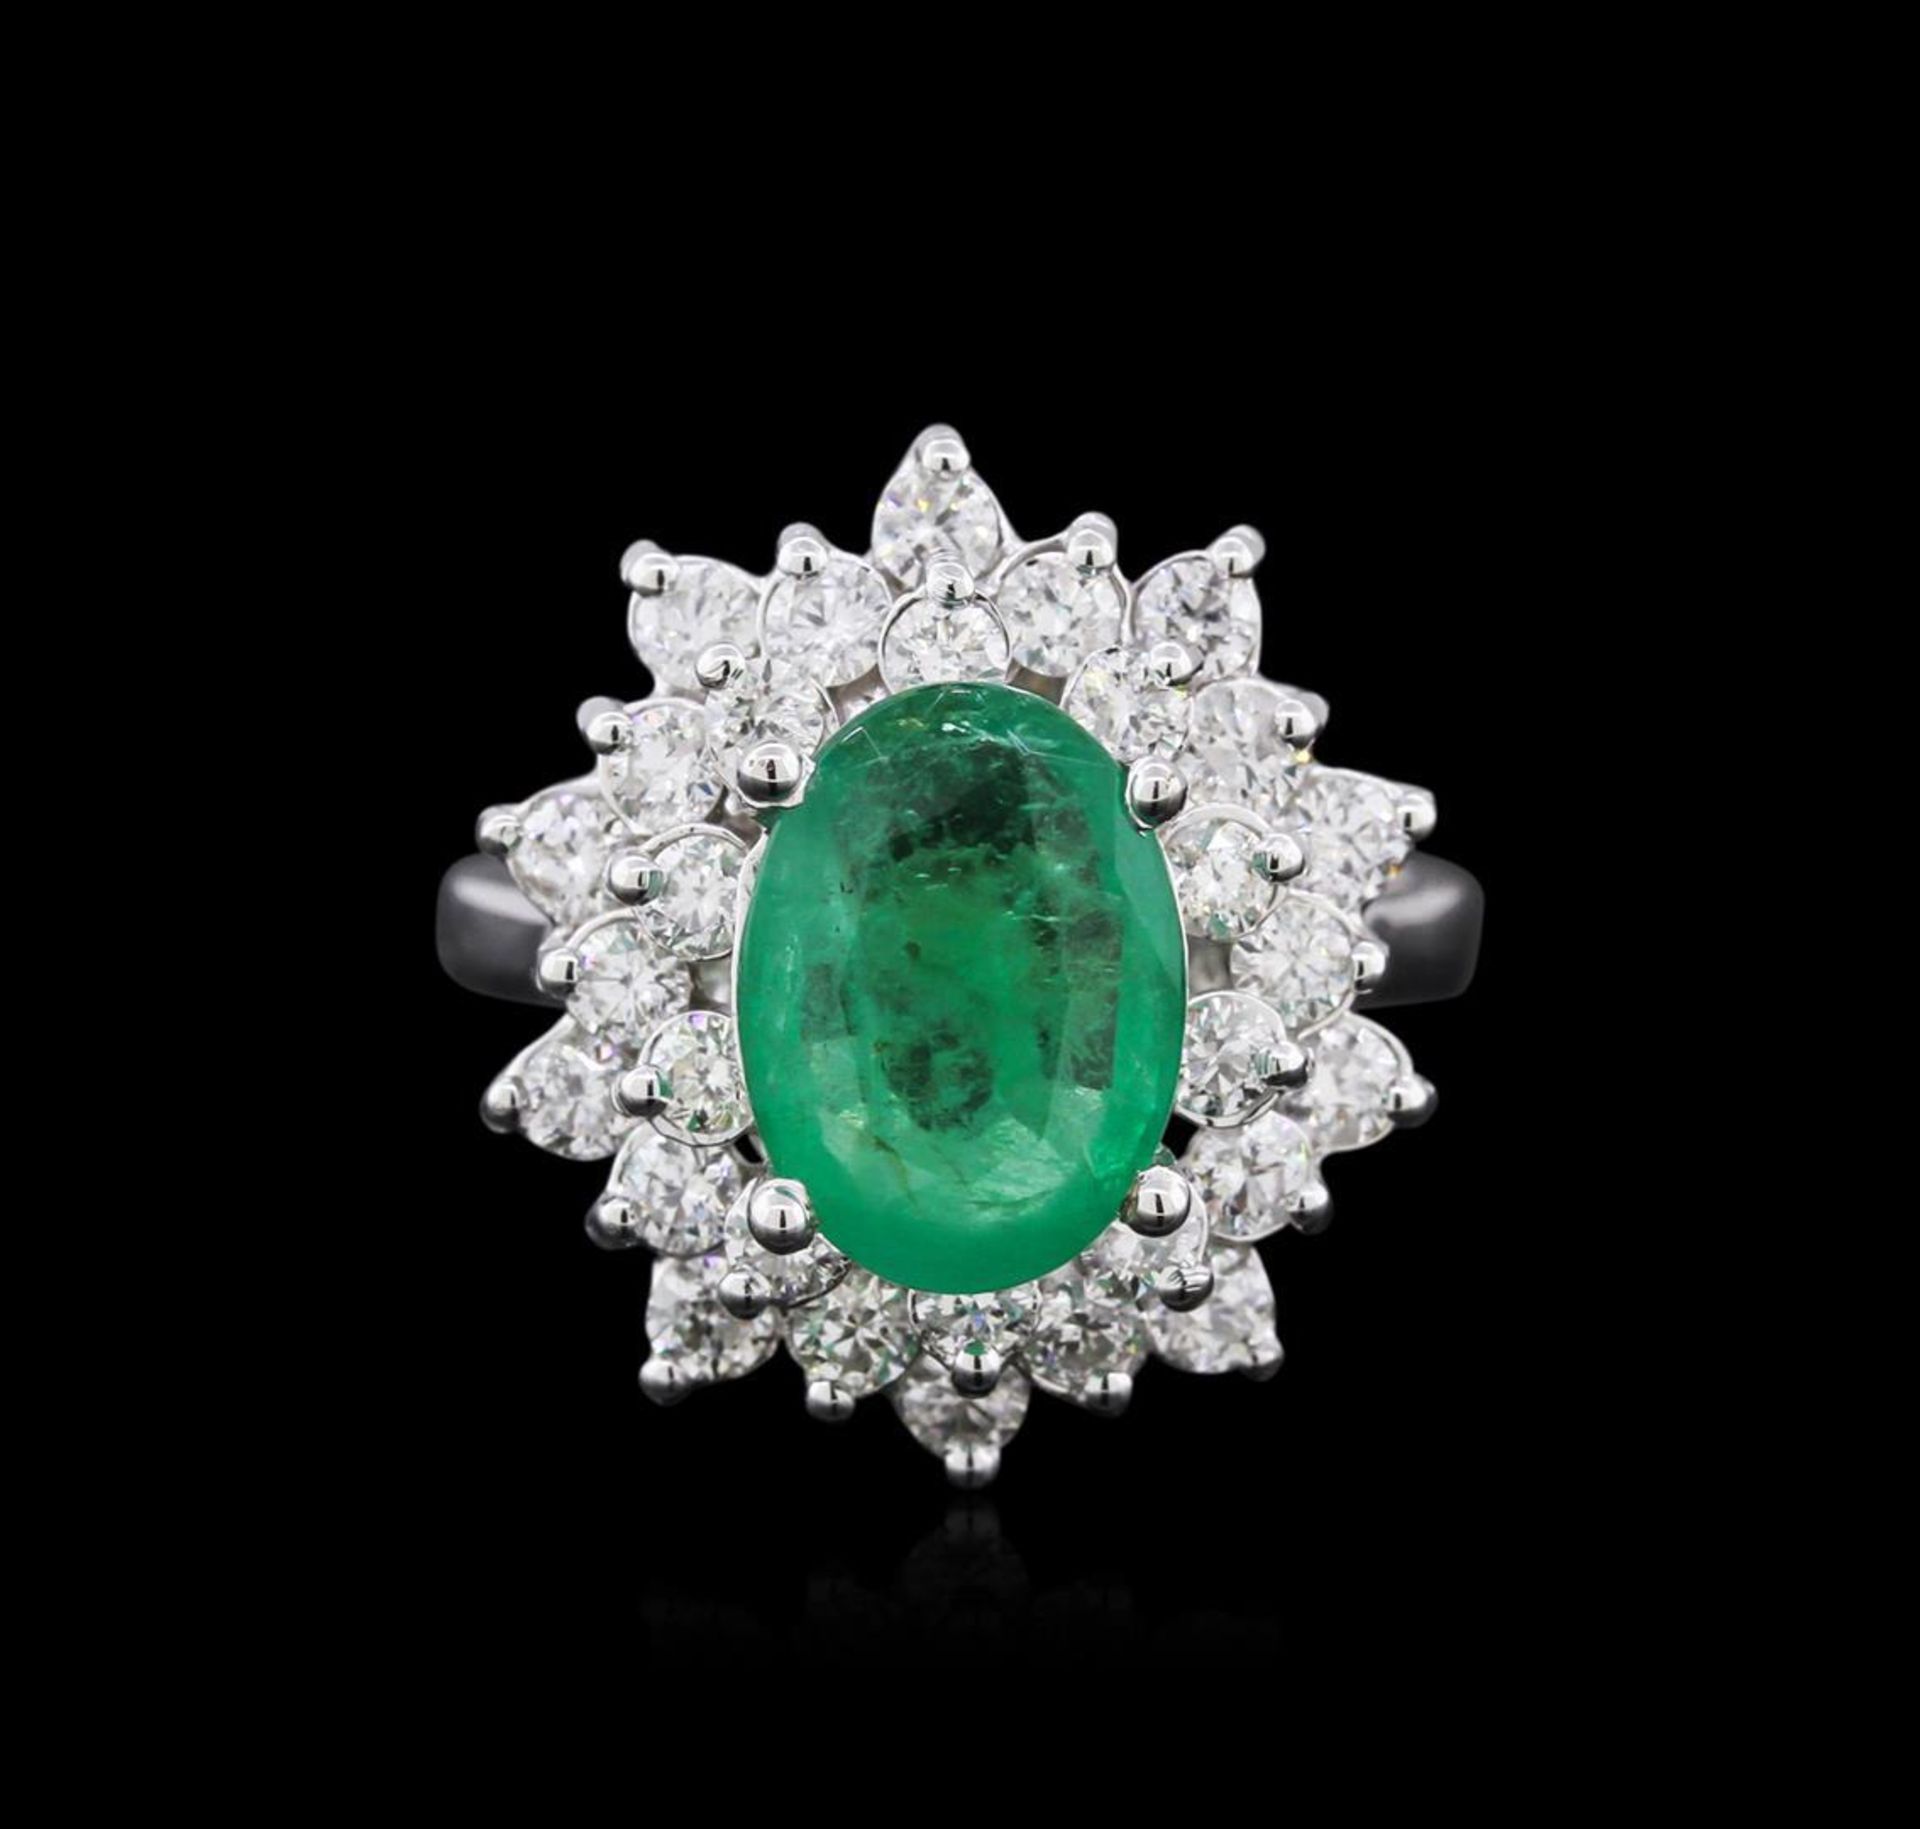 14KT White Gold 2.77 ctw Emerald and Diamond Ring - Image 2 of 4